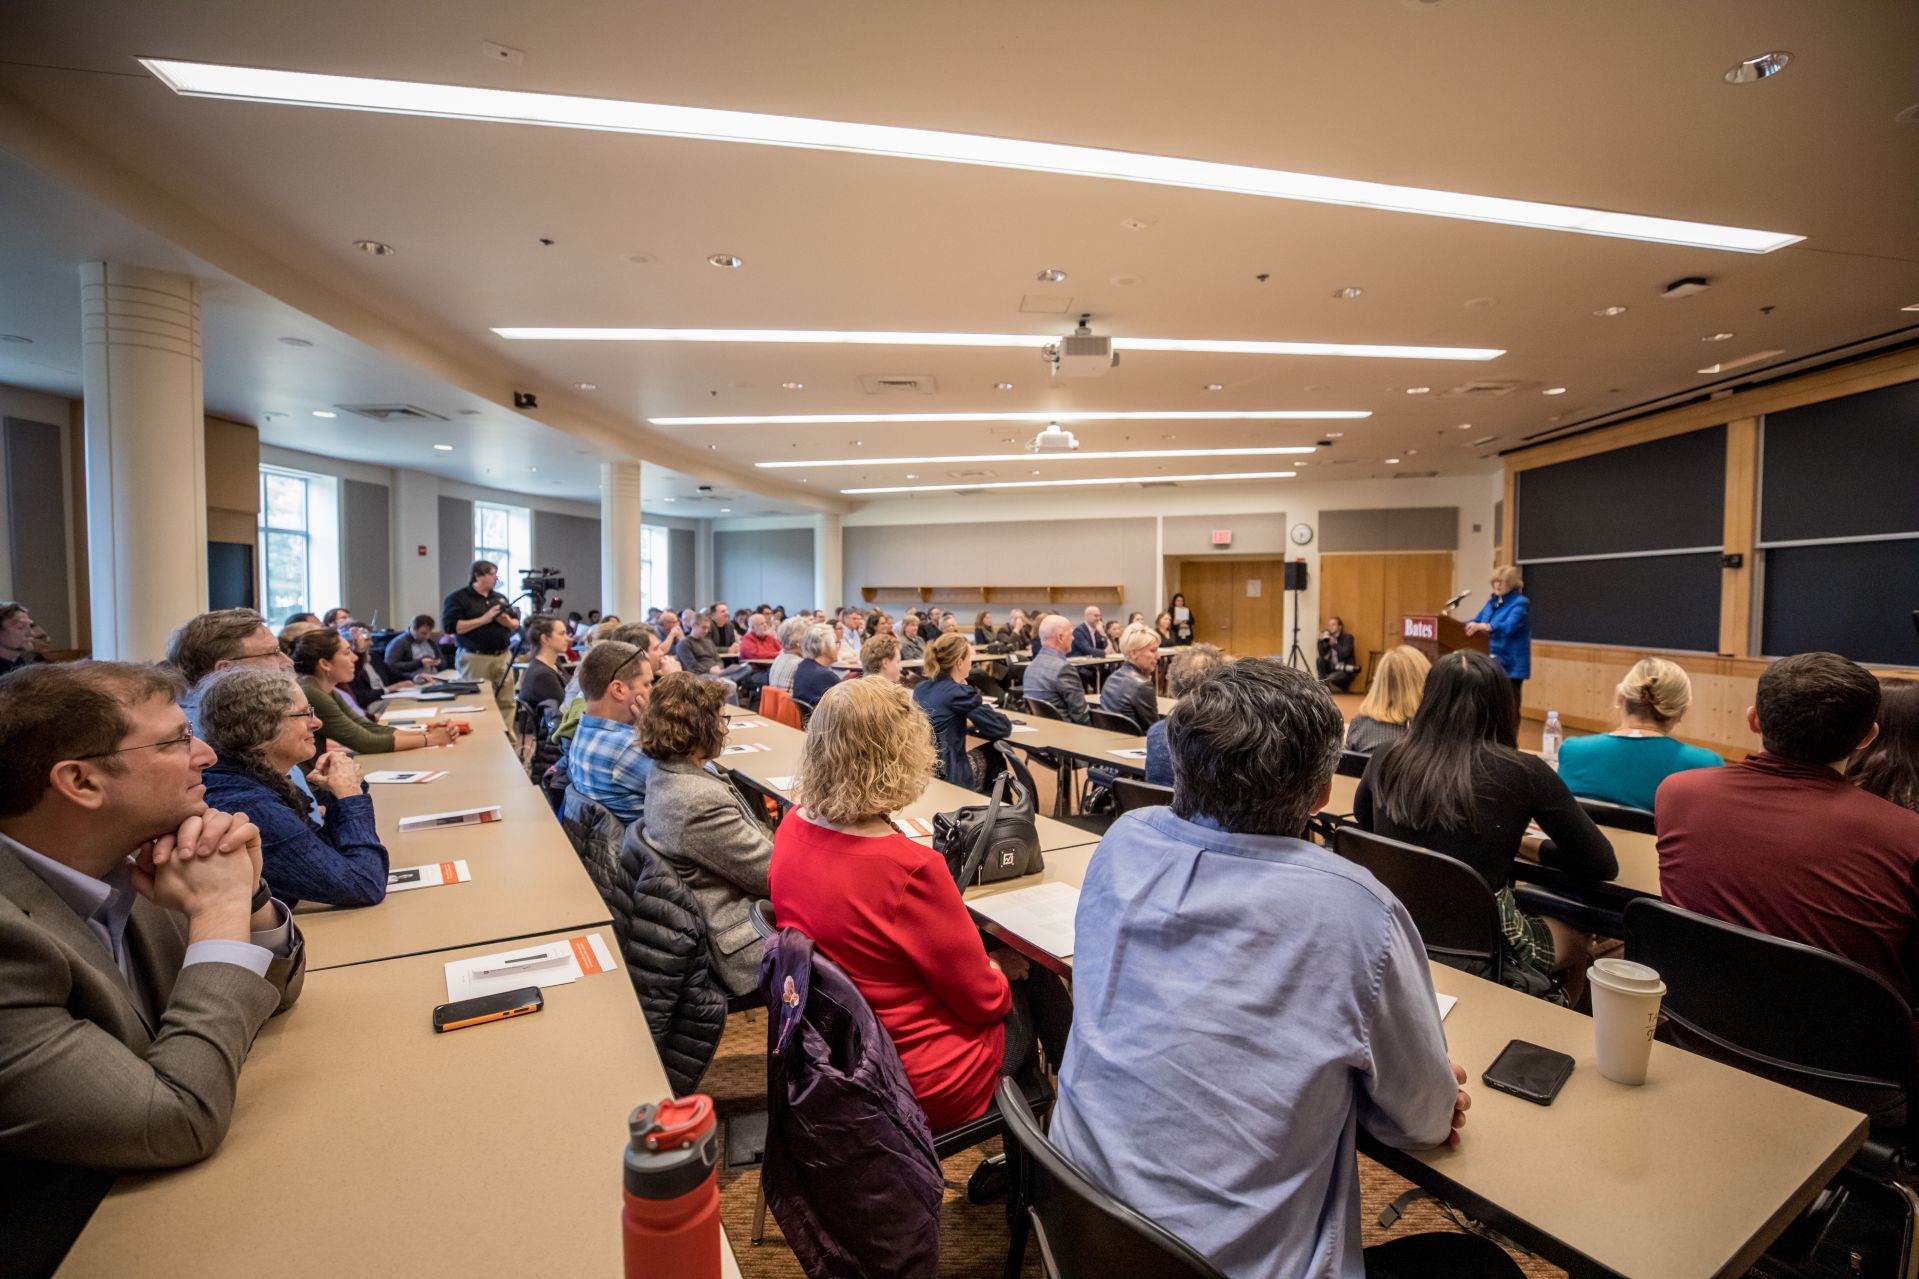 In front of a packed Pettengill Hall classroom, President Clayton Spencer welcomes listeners to April Hill’s inaugural lecture as Wagener Family Professor for Equity and Inclusion in STEM. (Rene Roy for Bates College)